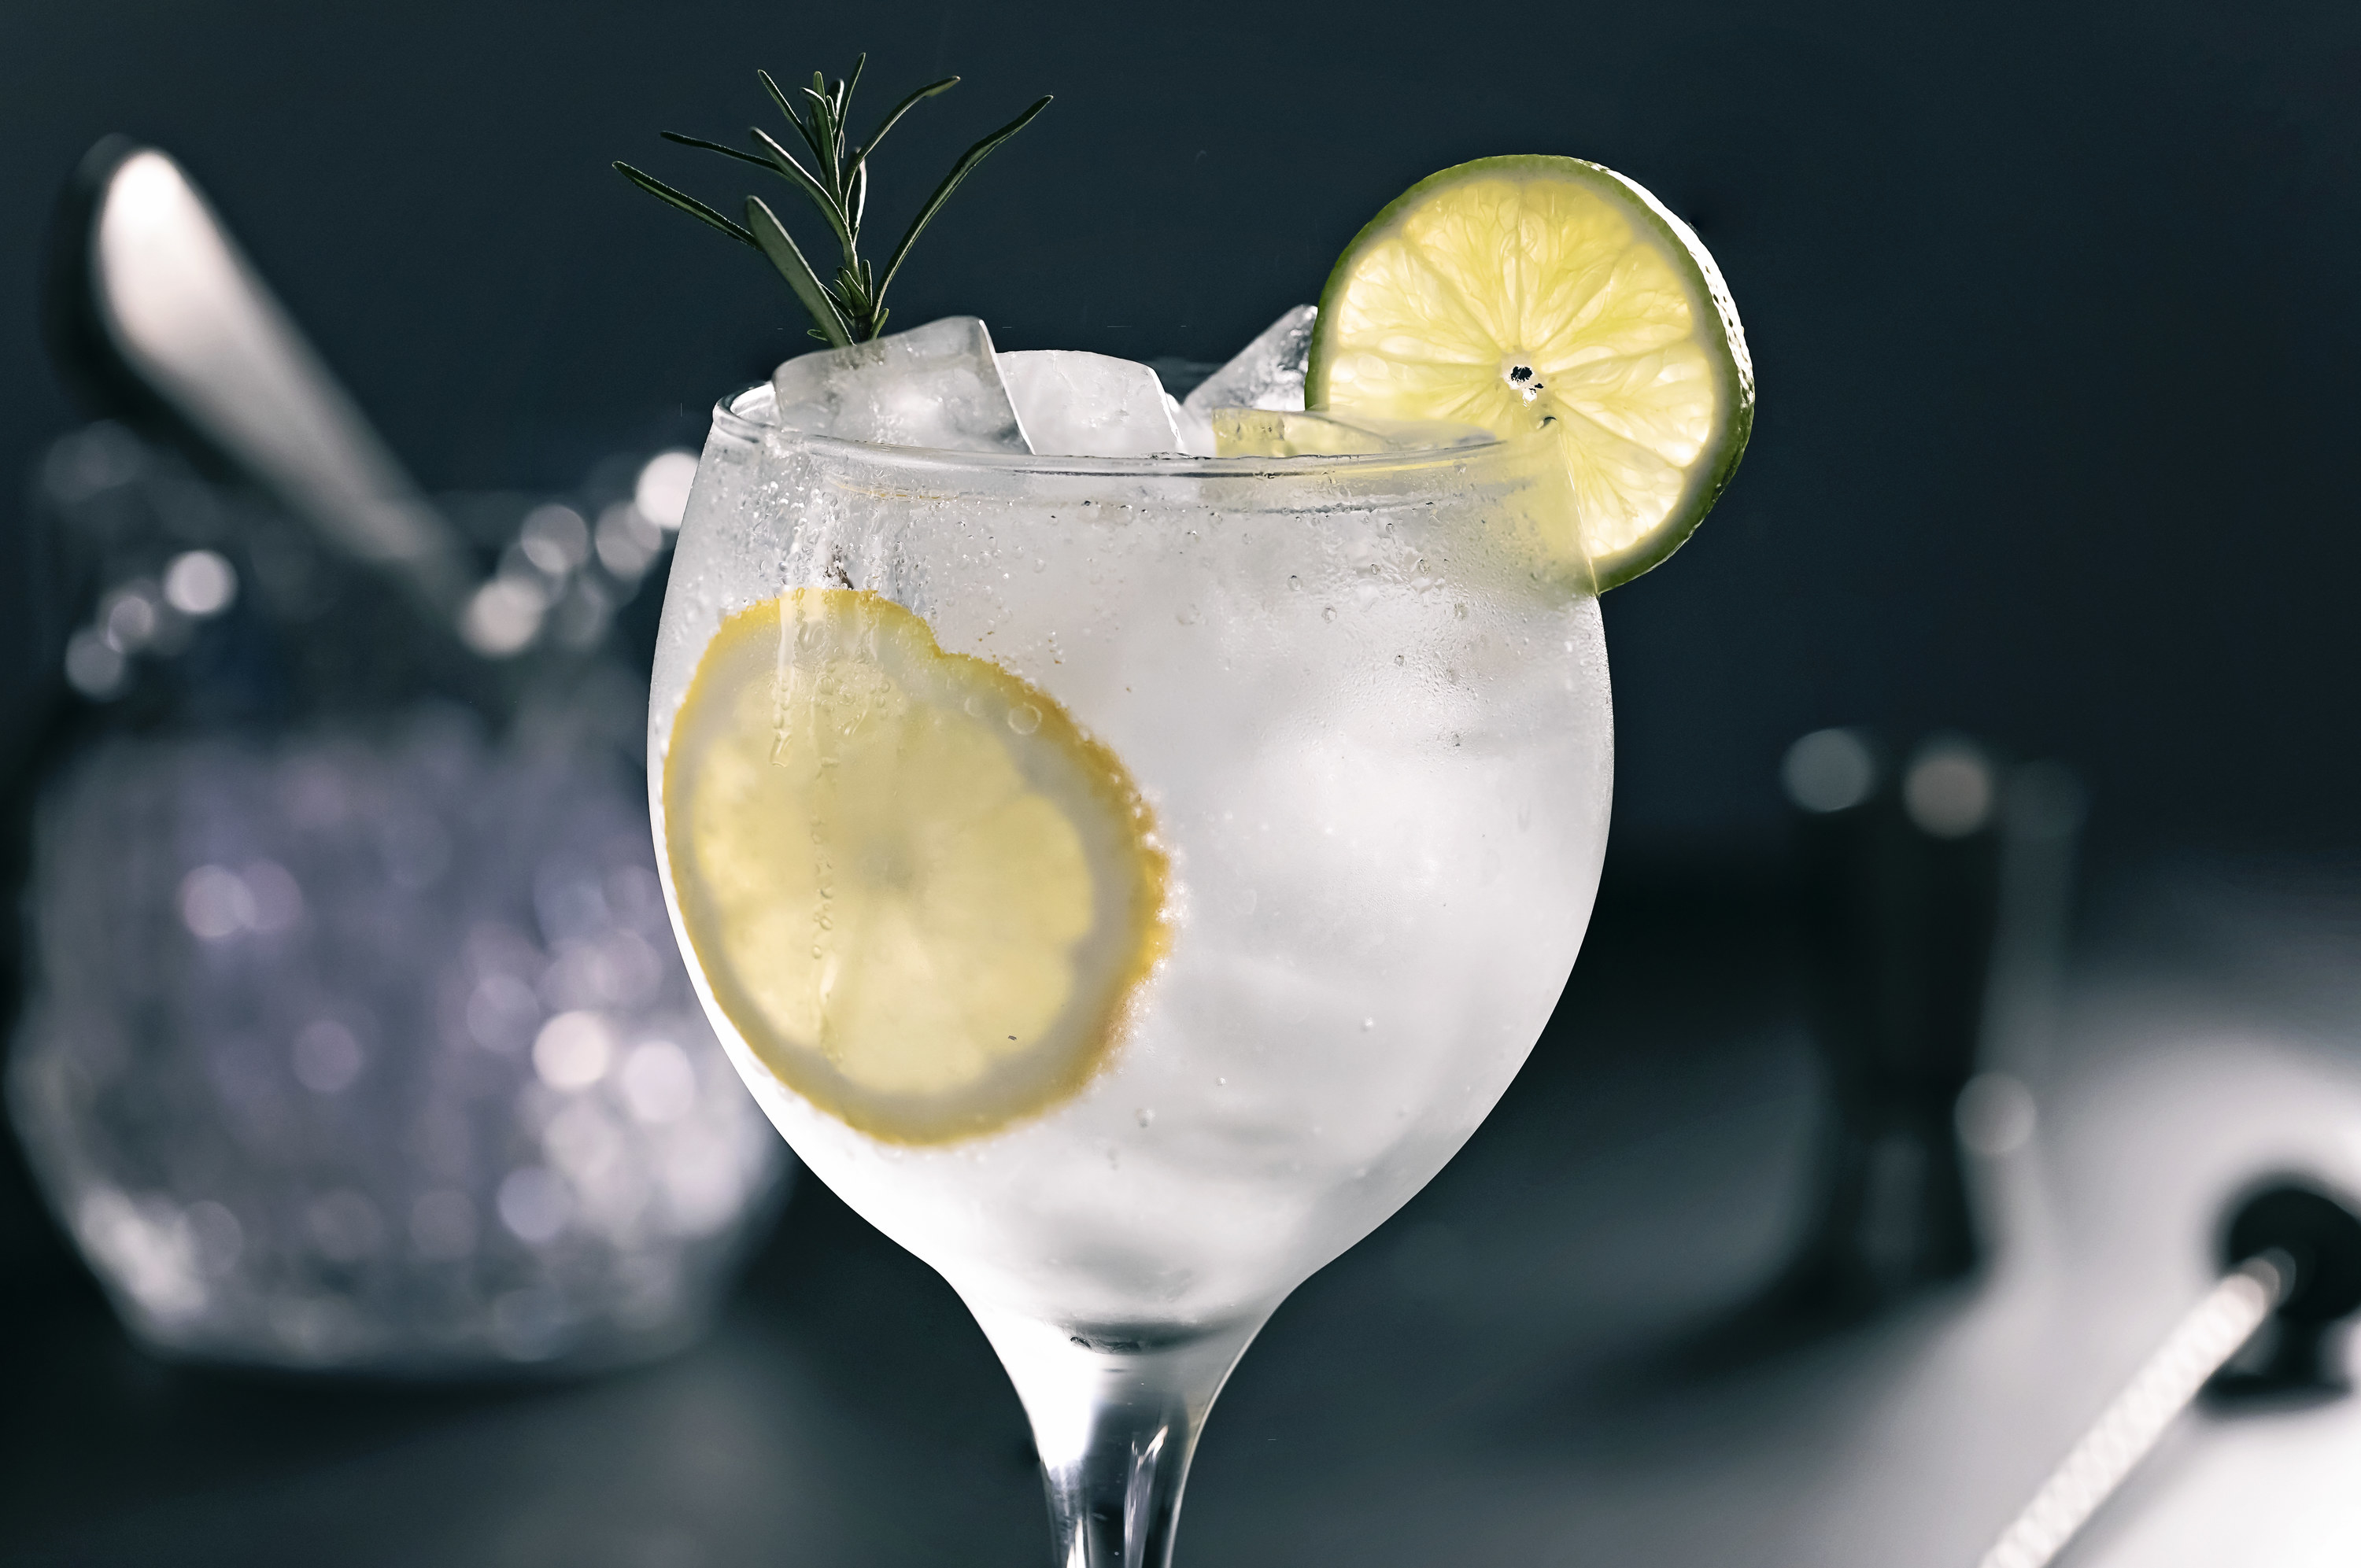 Close-up of a gin and tonic in a wine glass